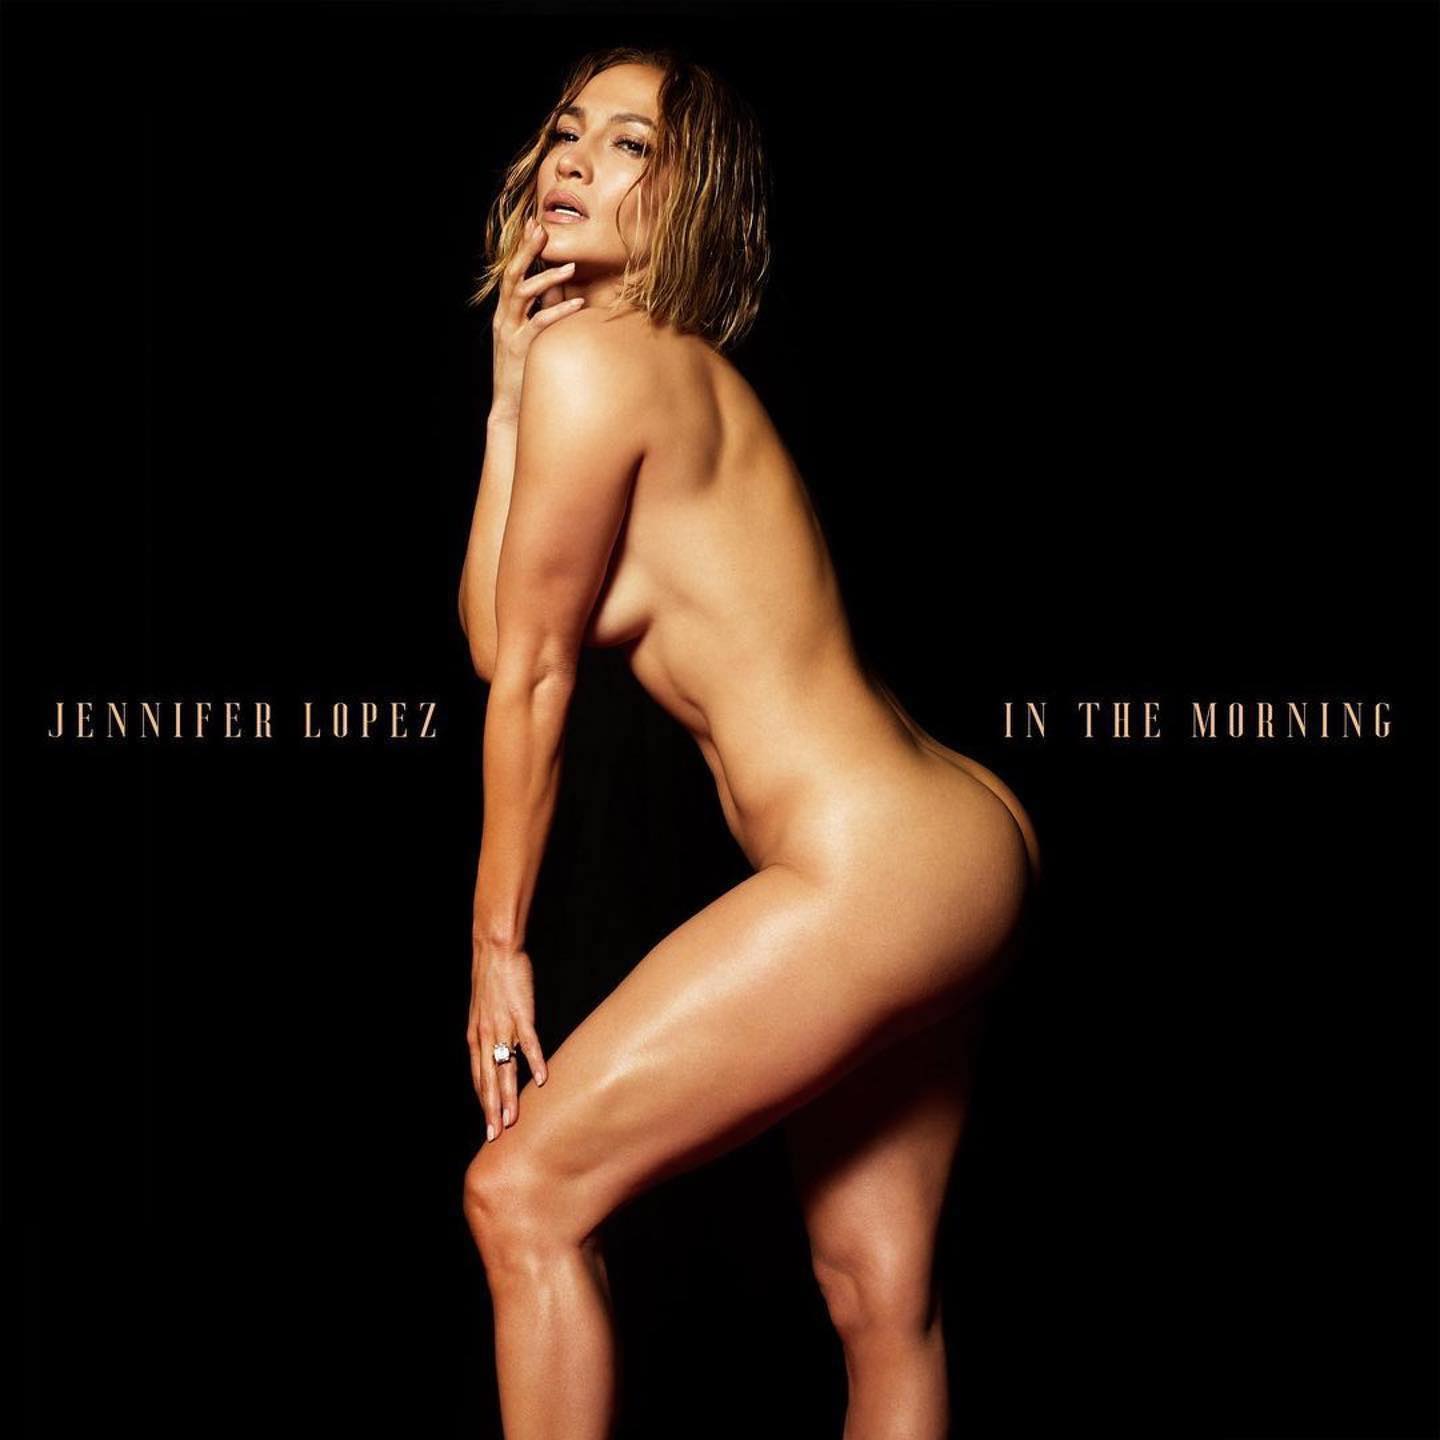 J. Lo Bares Her Heart And Body For The Release Of New Single “In The Morning”